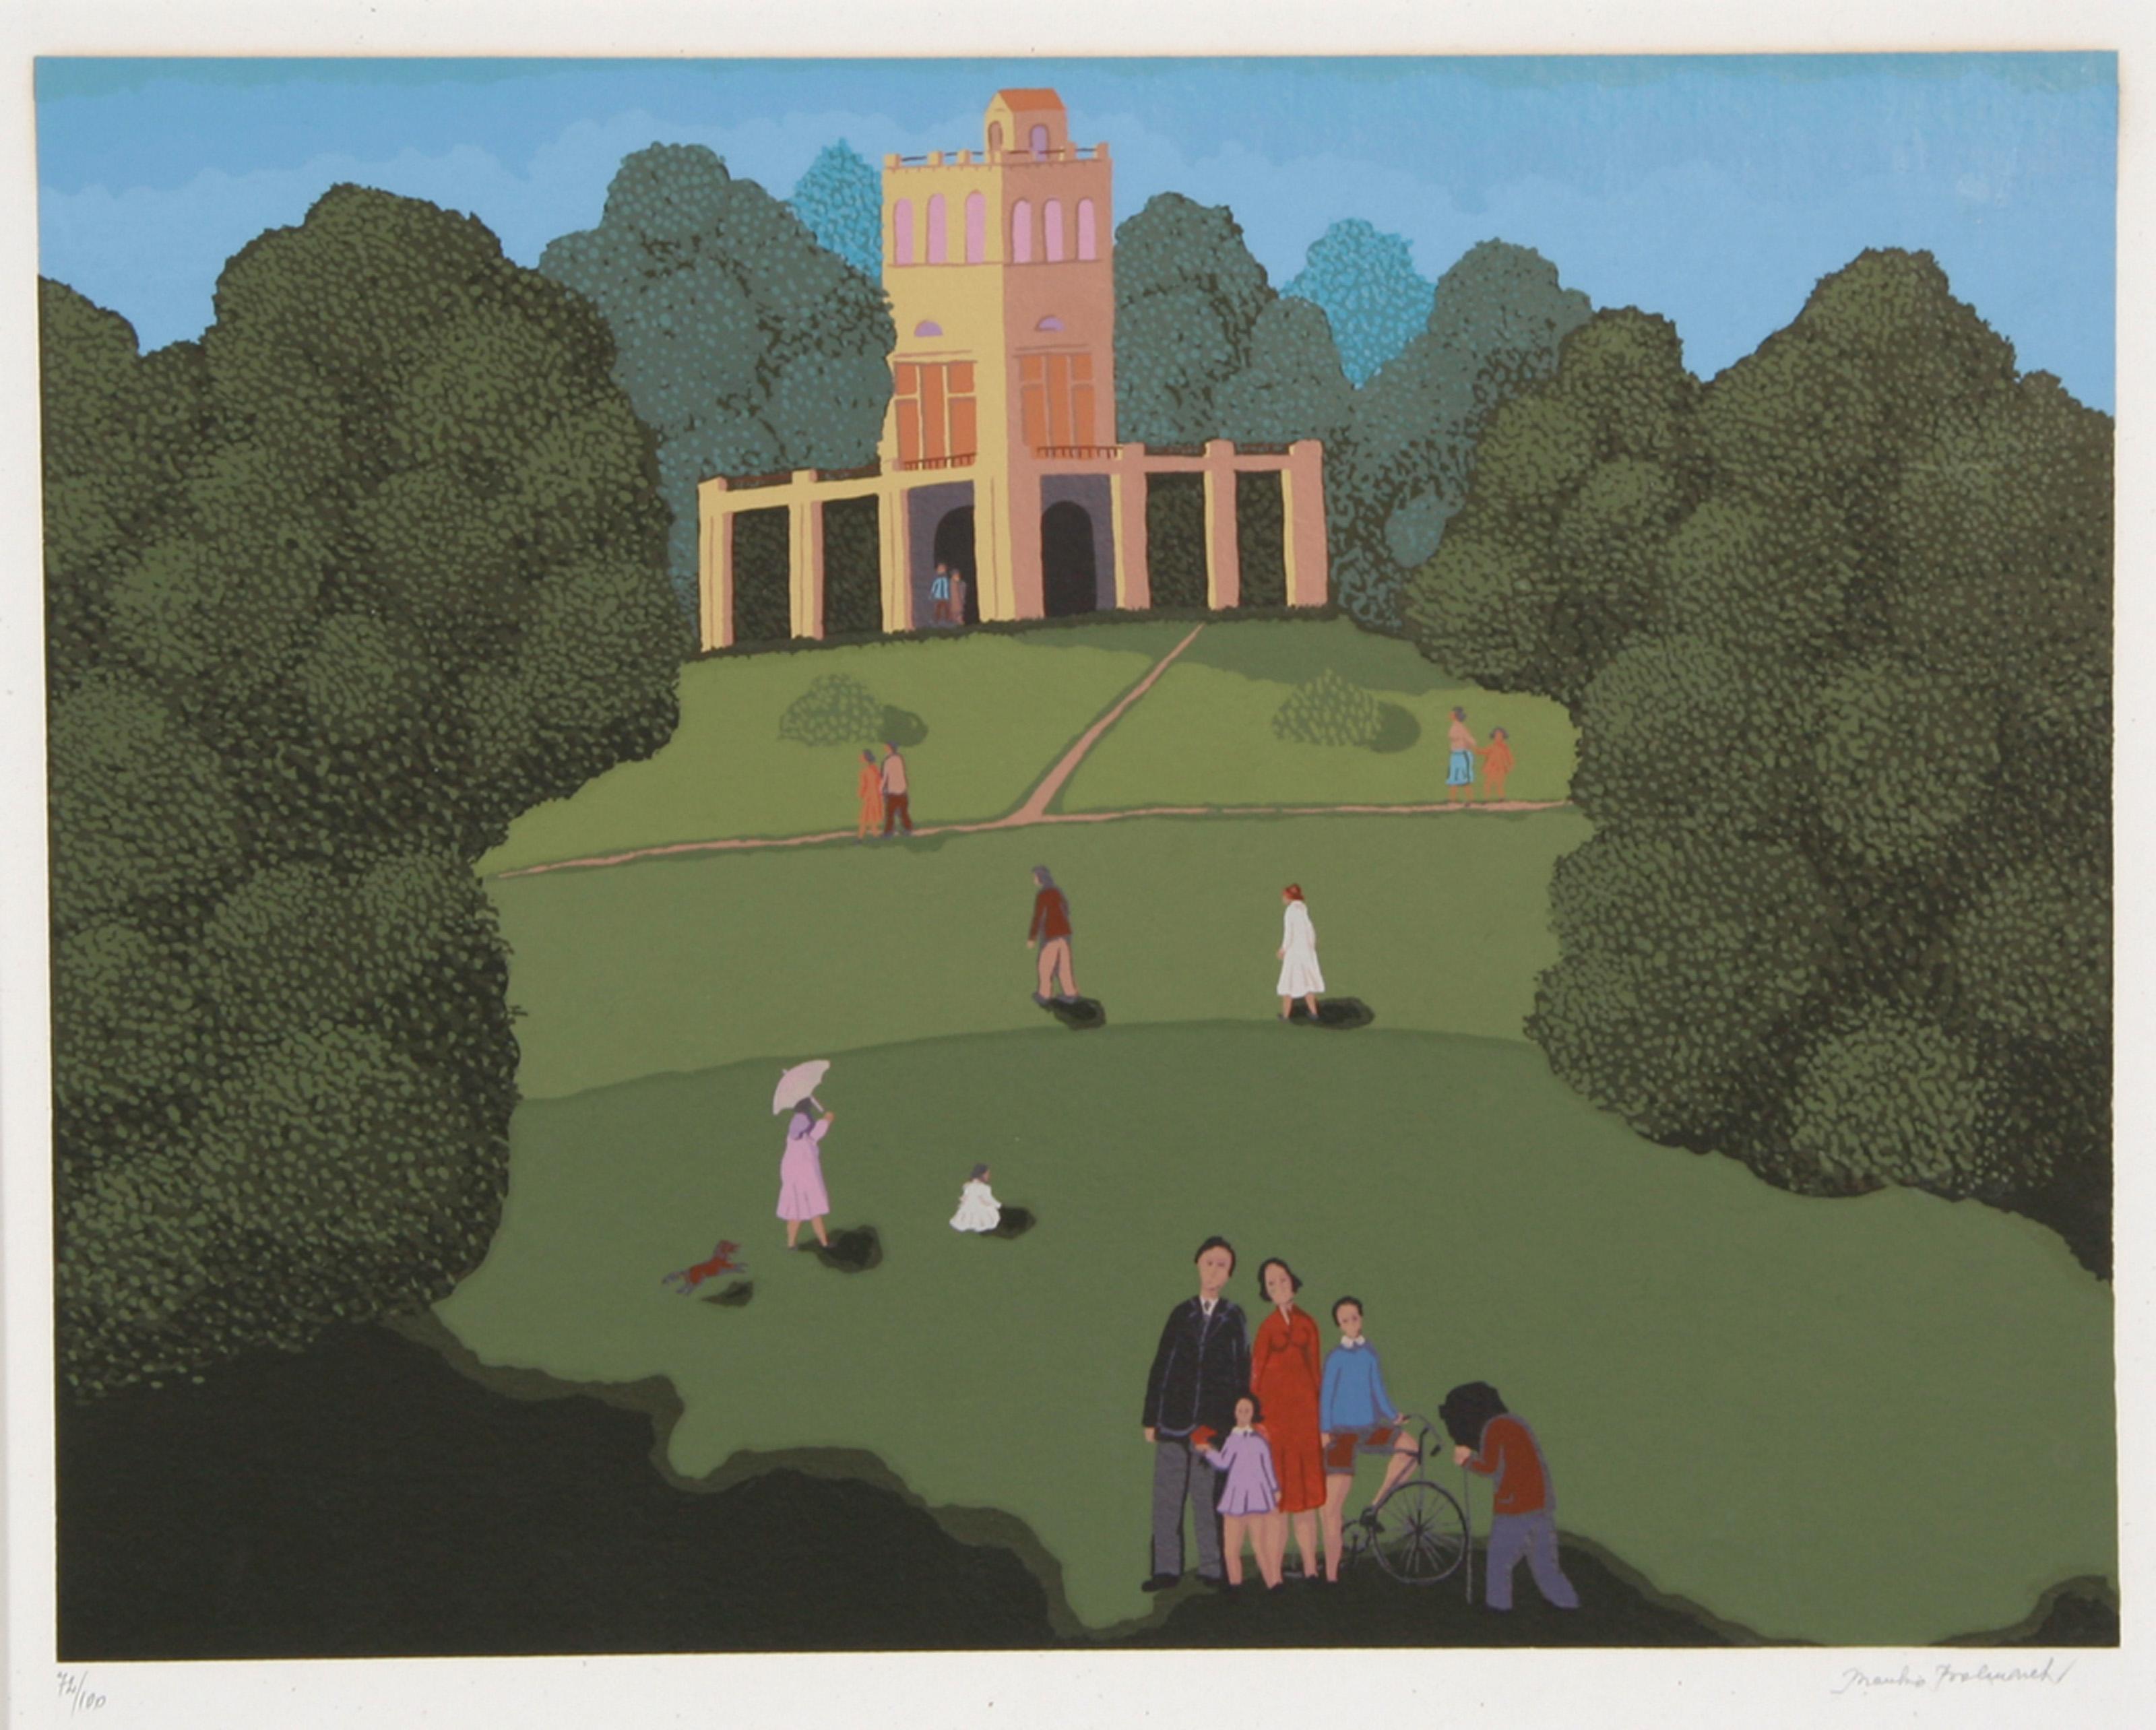 Branko Bahunek, Croatian (1935 - ) -  Sunday in Masimir Park. Medium: Screenprint, signed and numbered in pencil, Edition: 100, Size: 17 in. x 23.5 in. (43.18 cm x 59.69 cm) 